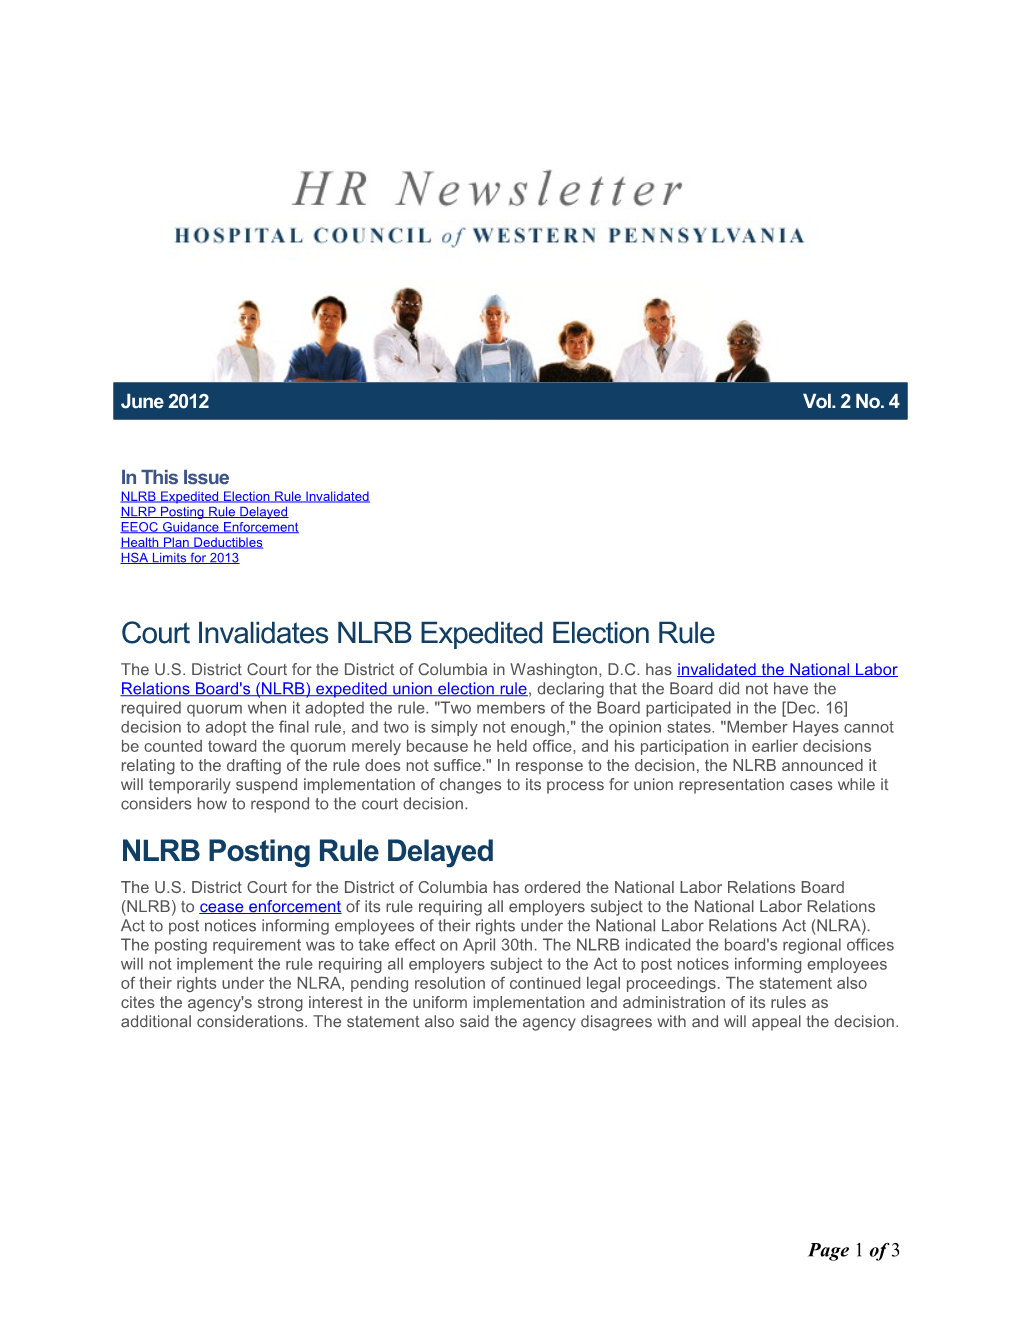 NLRB Expedited Election Rule Invalidated